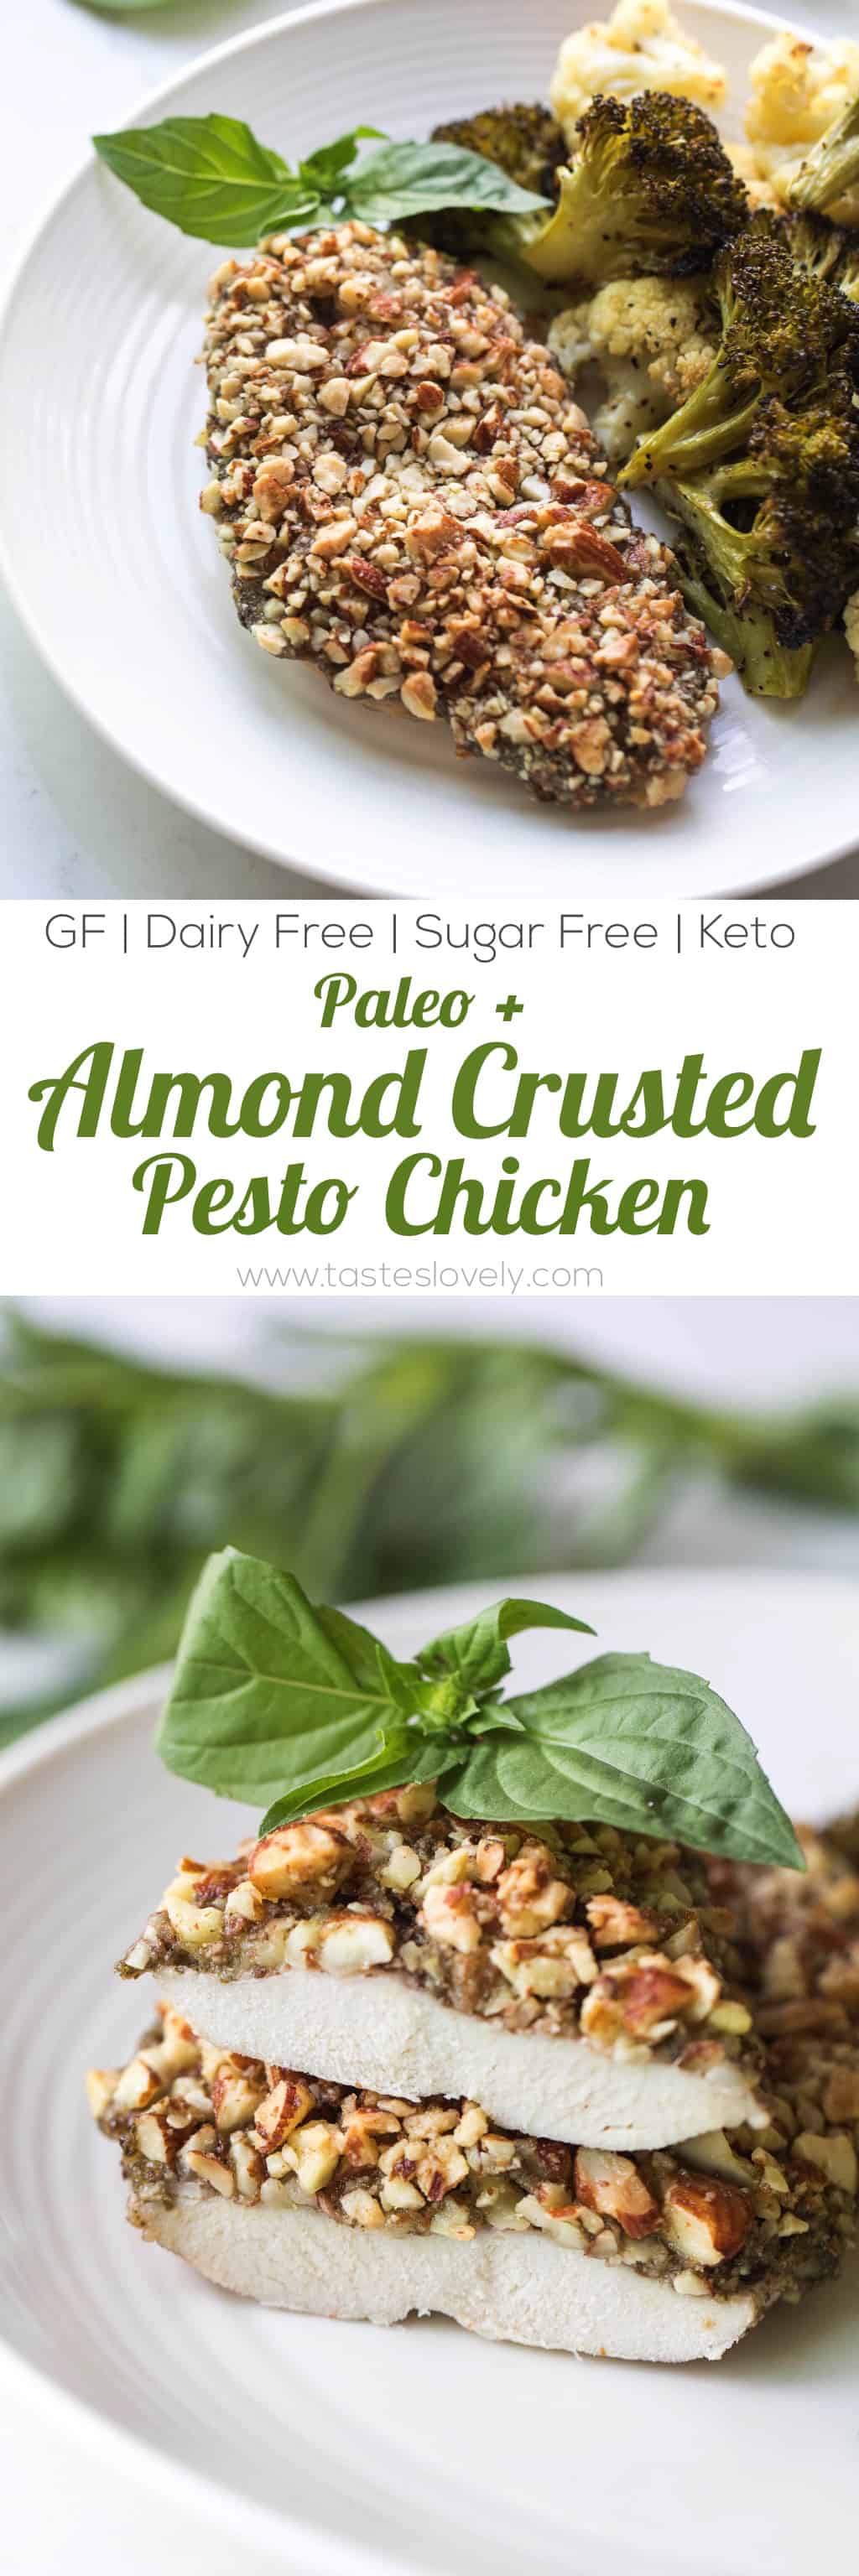 Paleo + Whole30 Almond Crusted Pesto Chicken - a quick and healthy 30 minute dinner recipe! #paleo #whole30 #glutenfree #grainfree #dairyfree #sugarfree #keto #cleaneating #realfood